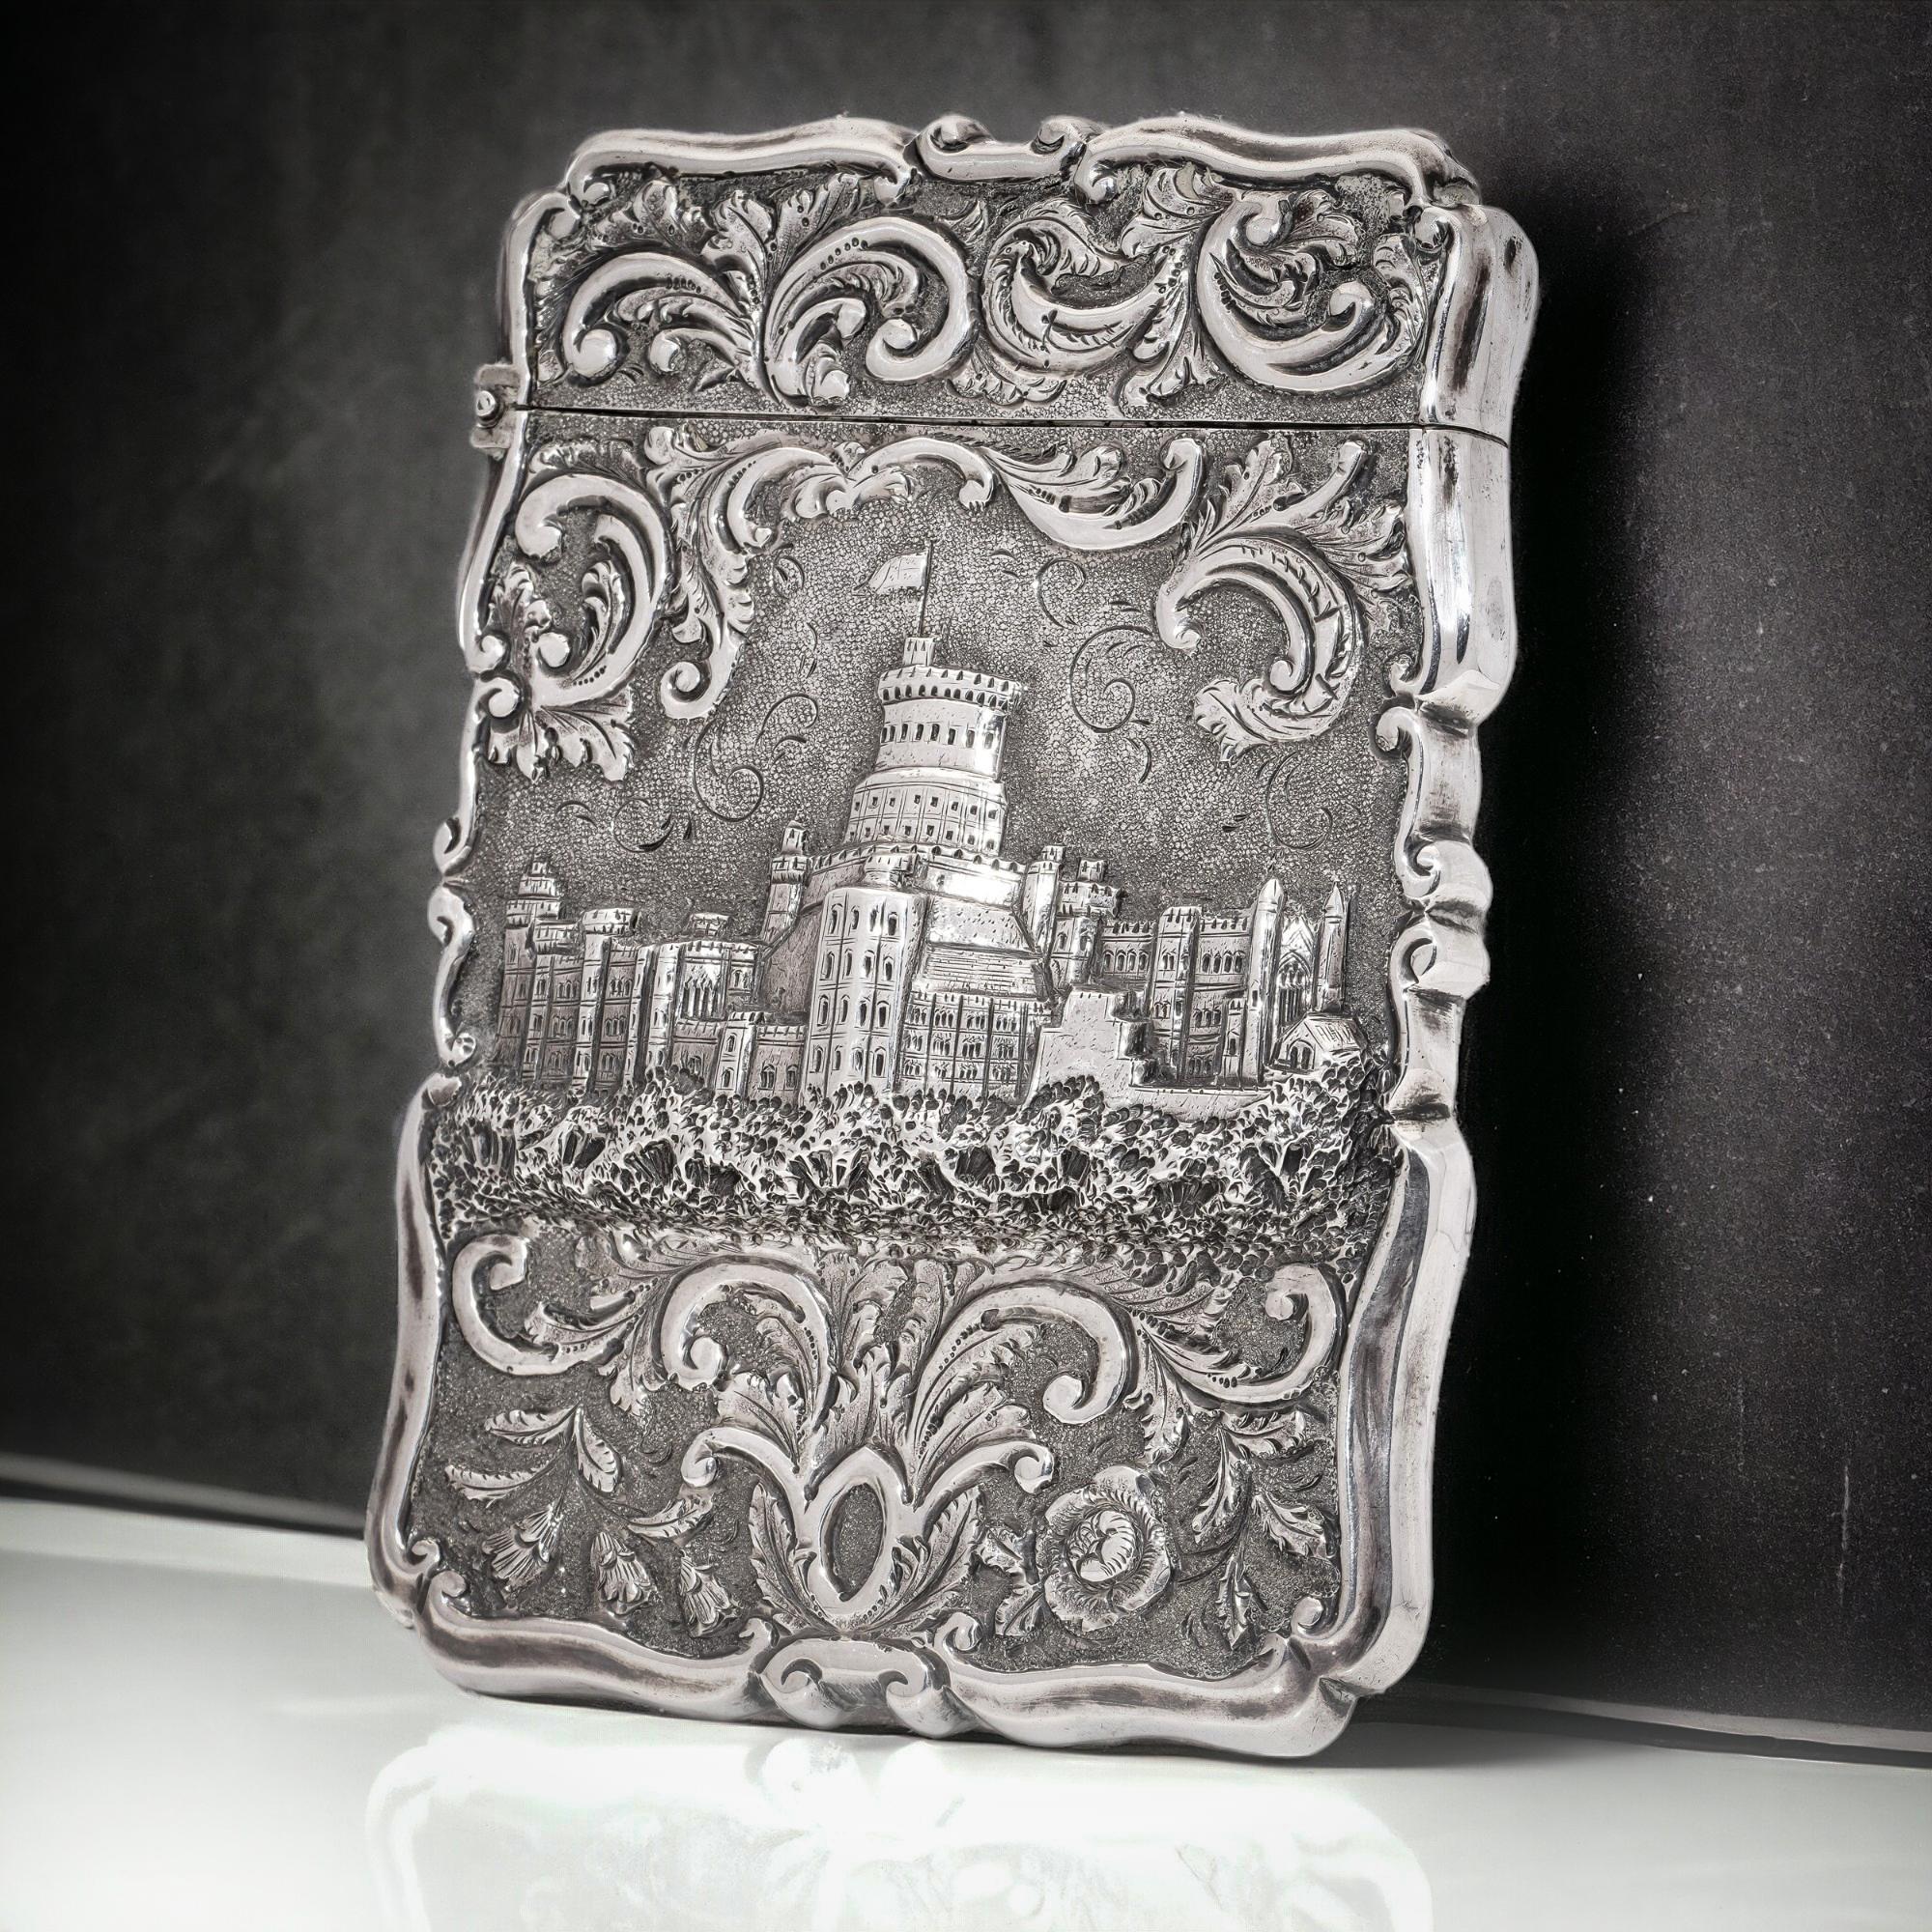 Antique Victorian 925 sterling silver embossed card case, featuring Windsor castle relief. 

A Victorian silver card case with a 'castle-top' design, crafted by Edward Thomason in 1851
The front features a raised depiction of Windsor Castle